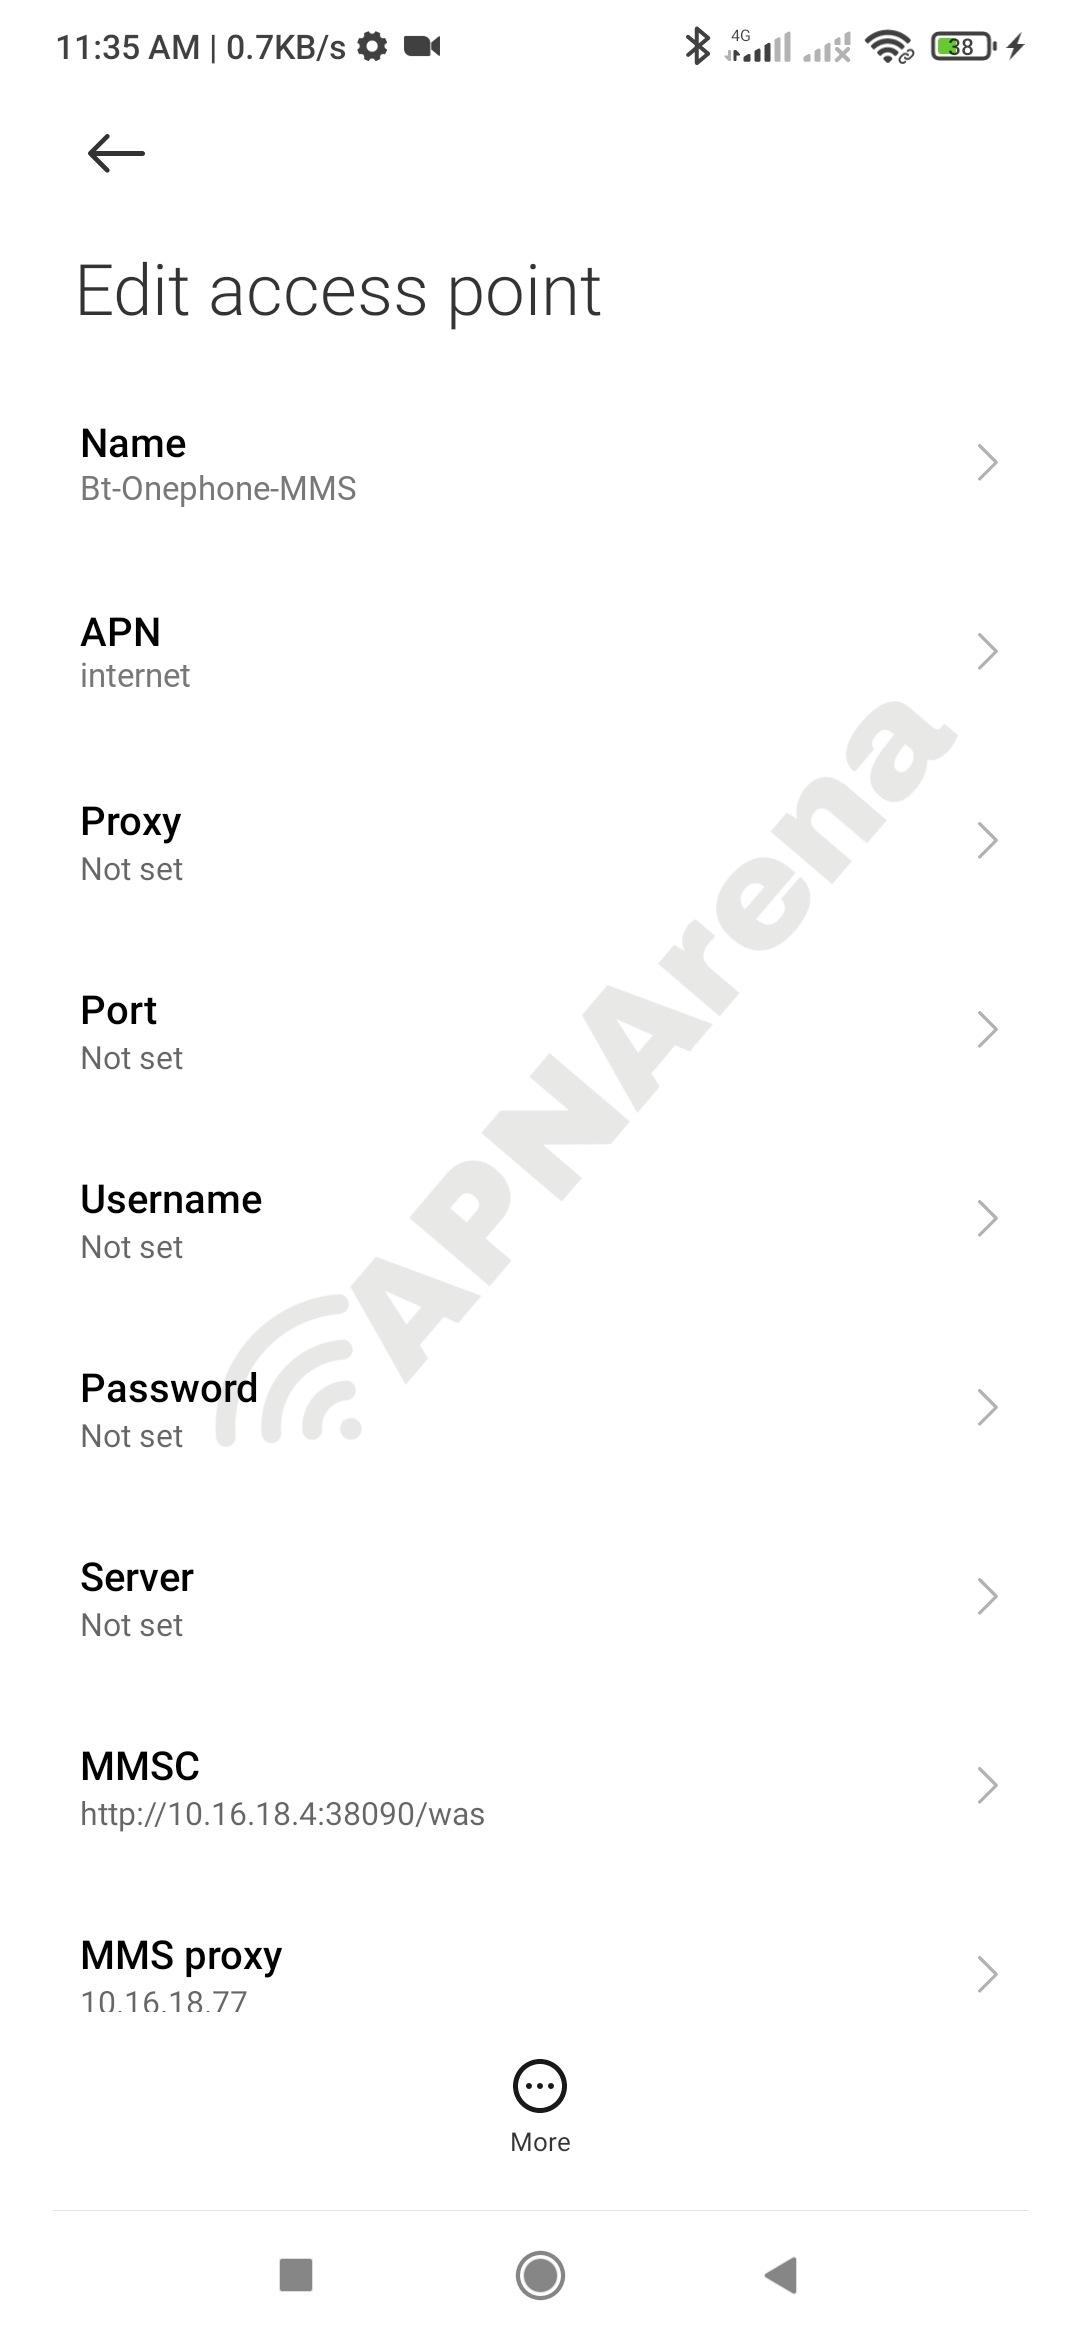 BT Onephone (BTOP) MMS Settings for Android